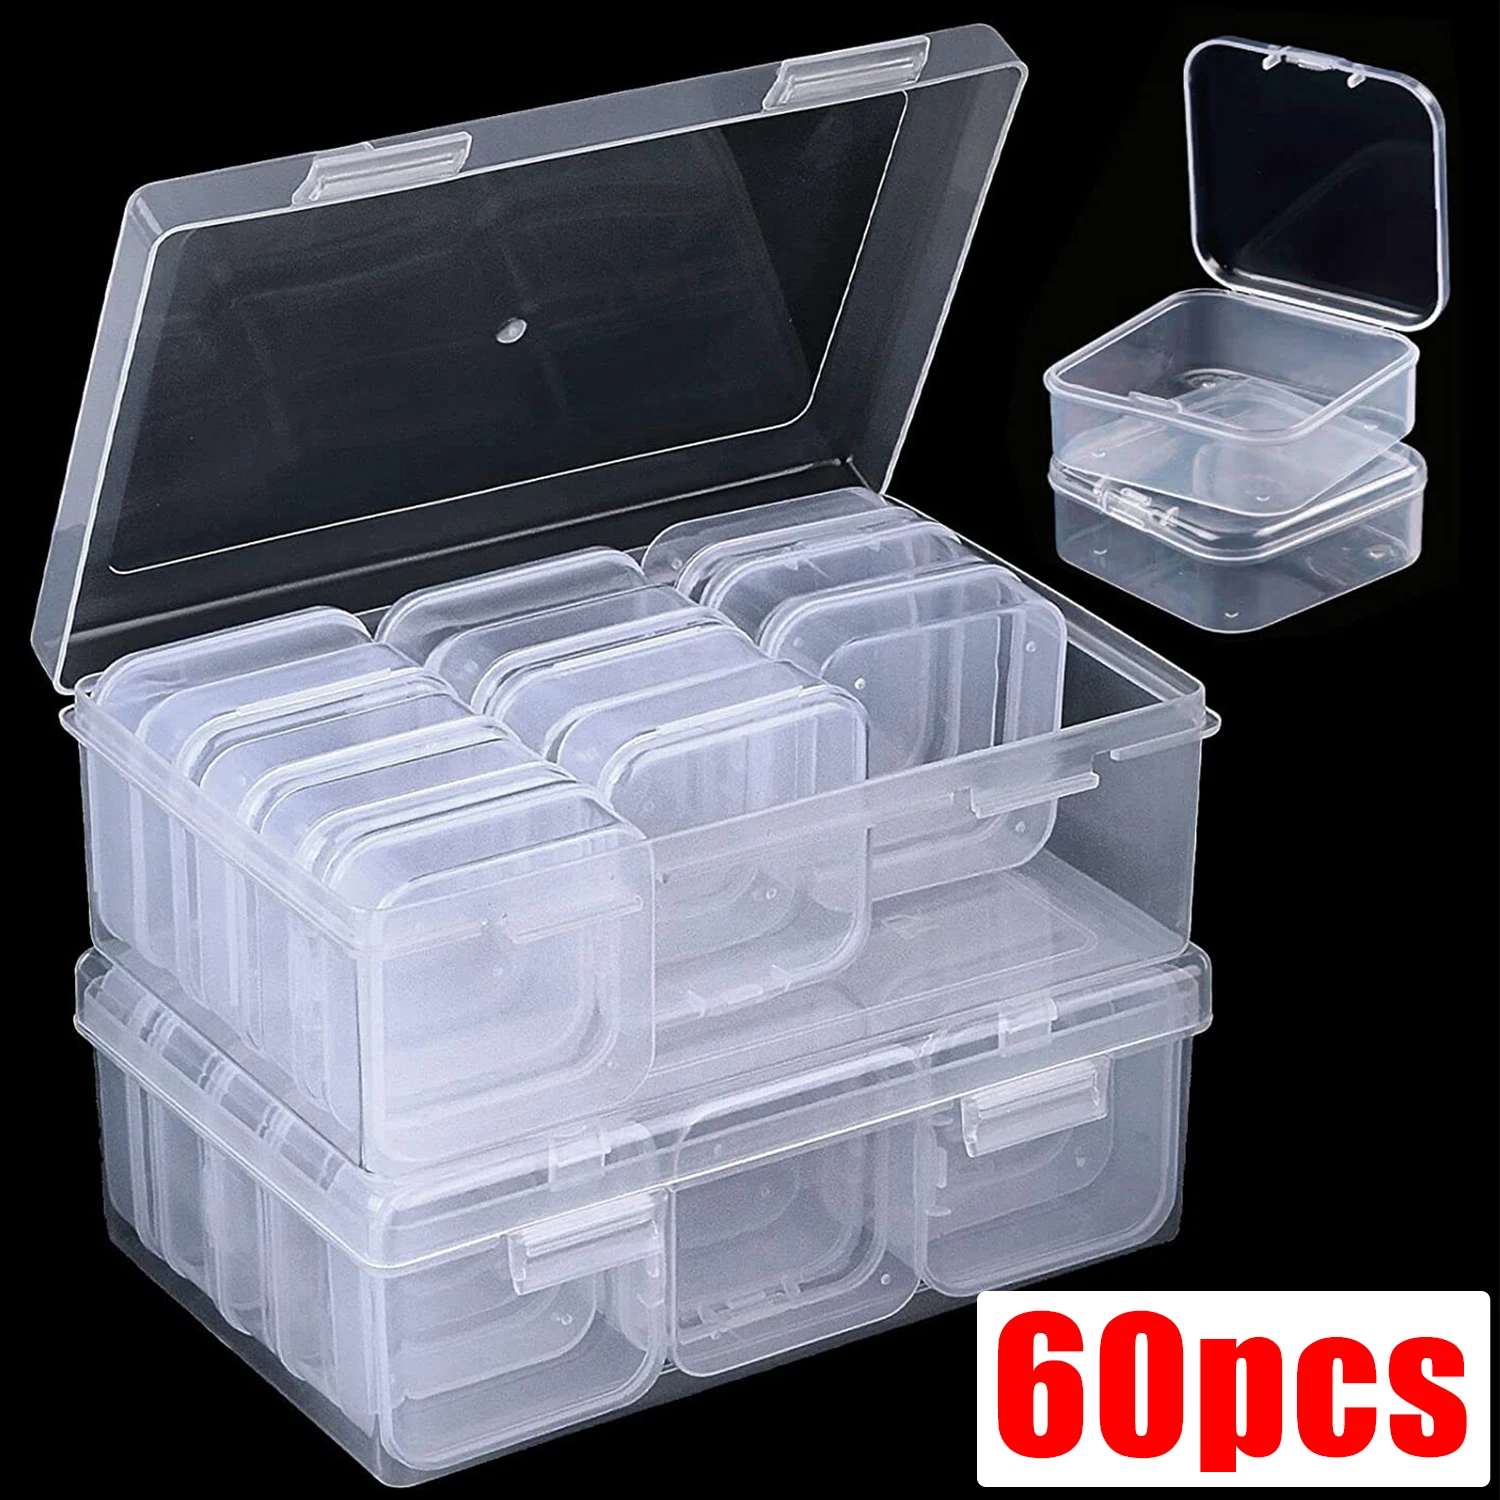 60 Packs Clear Small Plastic Containers Transparent Storage Box with Hinged Lid for Items Crafts Jewelry Package Clear Cases bouncy sports balls high resilience hole ball bouncy ball anti fall moon shape porous balls with high elasticity clear pattern